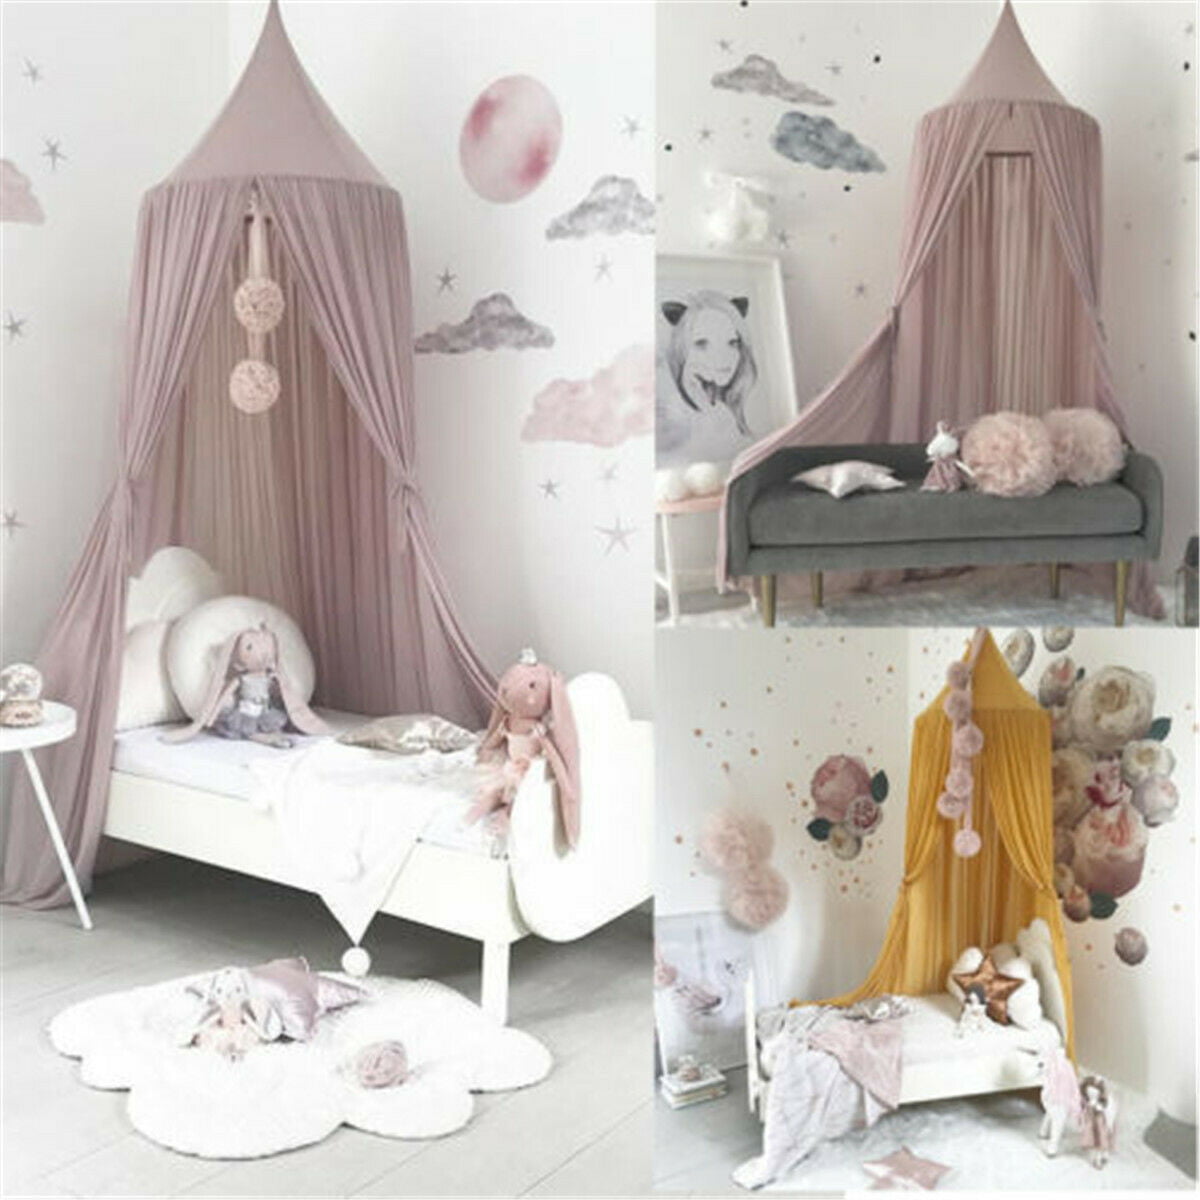 kids baby bed